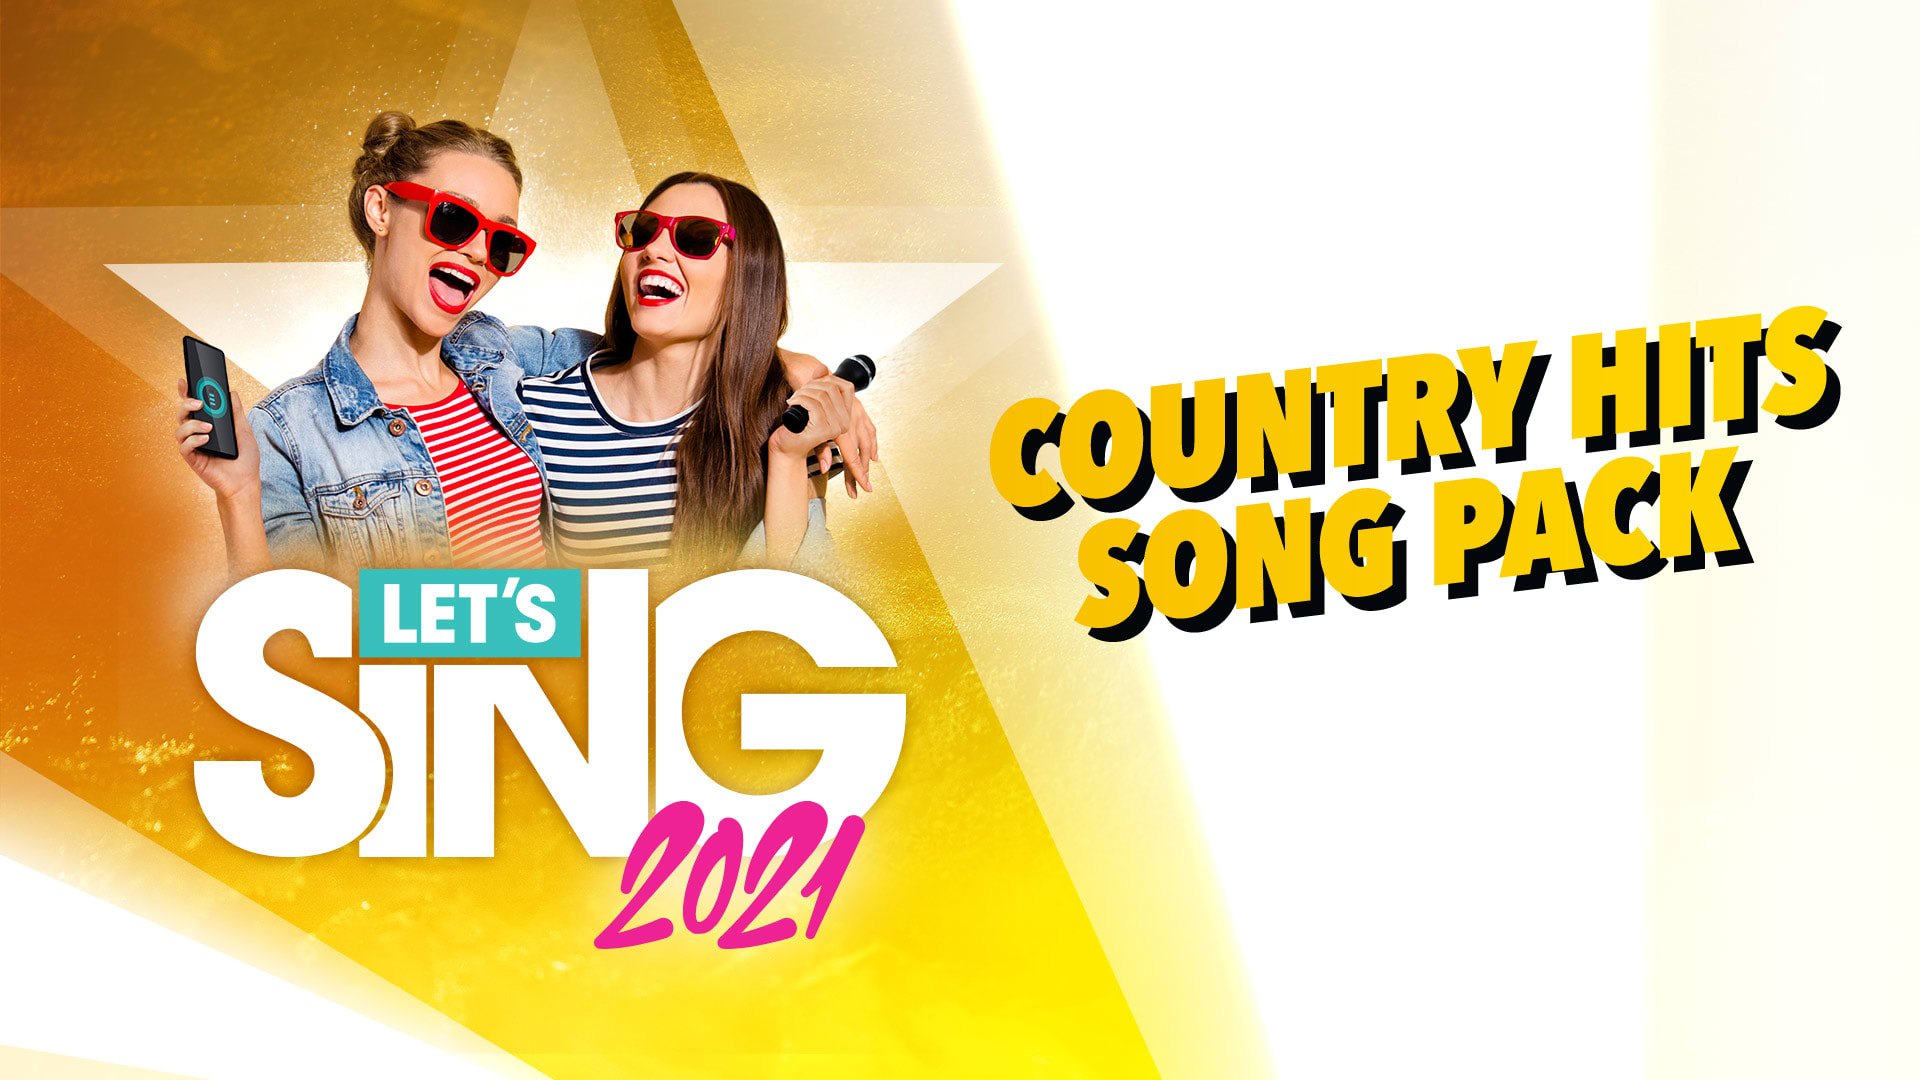 Let's Sing 2021 - Country Hits Song Pack